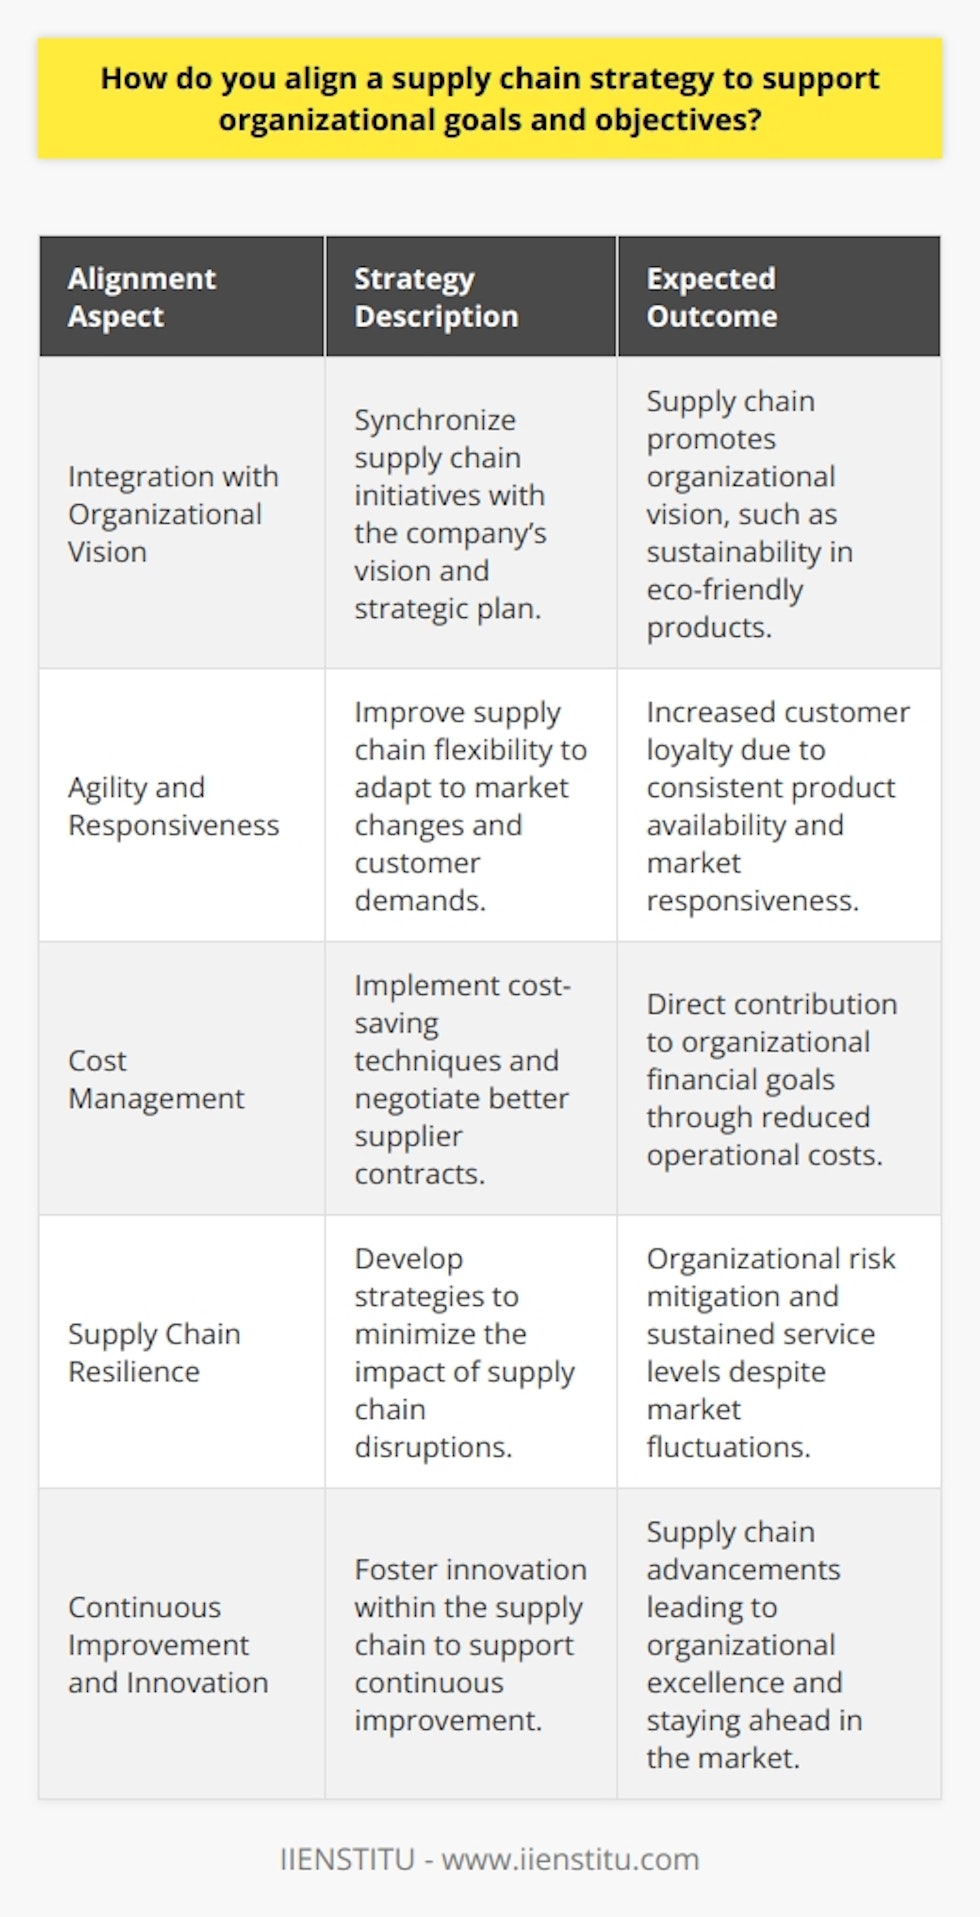 Aligning a supply chain strategy to support organizational goals and objectives is a multidimensional endeavor that necessitates a comprehensive understanding of the company's overarching aims. As organizations strive to achieve their targets, the supply chain becomes a powerful lever, capable of influencing performance across the board. Here is how strategic alignment can be established to cultivate a harmonious relationship between supply chain operations and organizational ambitions.**Integration with Organizational Vision**The first step in alignment is to dive into the organization's vision and strategic plan. This requires a synergistic approach where supply chain managers work closely with senior executives to ensure that supply chain initiatives are not in silos but integrated with the broader business strategy.For instance, if a company aims to be the leader in delivering eco-friendly products, the supply chain strategy must prioritize sustainability. This could involve sourcing materials from environmentally responsible suppliers, investing in renewable energy sources for logistics, or optimizing packaging to reduce waste.**Agility and Responsiveness**Next, the ability to swiftly adapt to market changes and customer demands is critical for supporting organizational goals that pivot around market leadership and customer satisfaction. An agile supply chain enables the company to quickly adjust inventory levels, ramp up or slow down production, and pivot logistics to ensure product availability that meets consumer needs, thereby enhancing customer loyalty.This could mean re-evaluating supply chain partners to ensure they offer the flexibility needed, or implementing an IT infrastructure that provides real-time data for faster decision-making.**Cost Management**In the pursuit of financial stability or growth, reducing supply chain costs is paramount. A cost-effective supply chain directly contributes to the bottom line, enabling the company to invest in other strategic areas or pass savings to customers.Ways to achieve cost efficiency include incorporating technology for better route planning to save on fuel costs, renegotiating contracts with suppliers, and adopting a just-in-time inventory system to reduce holding costs, all without compromising on the reliability and quality of the product offering.**Supply Chain Resilience**For organizations targeting long-term viability and risk management, creating a resilient supply chain is key. This involves strategies for minimizing the impact of disruptions, such as diversifying the supplier base, establishing robust contingency plans, and maintaining strategic safety stock levels.By considering potential threats and preparing accordingly, a resilient supply chain supports organizational goals by mitigating risks that could jeopardize customer service levels or market position.**Continuous Improvement and Innovation**Organizations with objectives centered around continuous improvement and staying ahead of the competition must have a supply chain that reflects these ambitions. Encouraging a culture of innovation within supply chain processes can unlock efficiencies and new capabilities.Investing in emergent technologies like machine learning and predictive analytics can drive significant improvements in forecasting and operational efficiencies. Moreover, adopting a mindset of continuous process improvement—often using data-driven insights—can lead to incremental enhancements that align with organizational goals of excellence and innovation.In conclusion, achieving alignment between supply chain strategy and organizational goals is about creating a symbiotic relationship where the supply chain acts as both a supporter and enabler of the company's core objectives. Whether it’s ensuring customer satisfaction, driving cost efficiency, enhancing productivity, or stimulating innovation and growth, a meticulously crafted supply chain strategy is not just ancillary but central to the realization of organizational ambitions. This strategic congruence is the hallmark of market leaders who understand that robust supply chain operations propel them towards achieving their business goals.